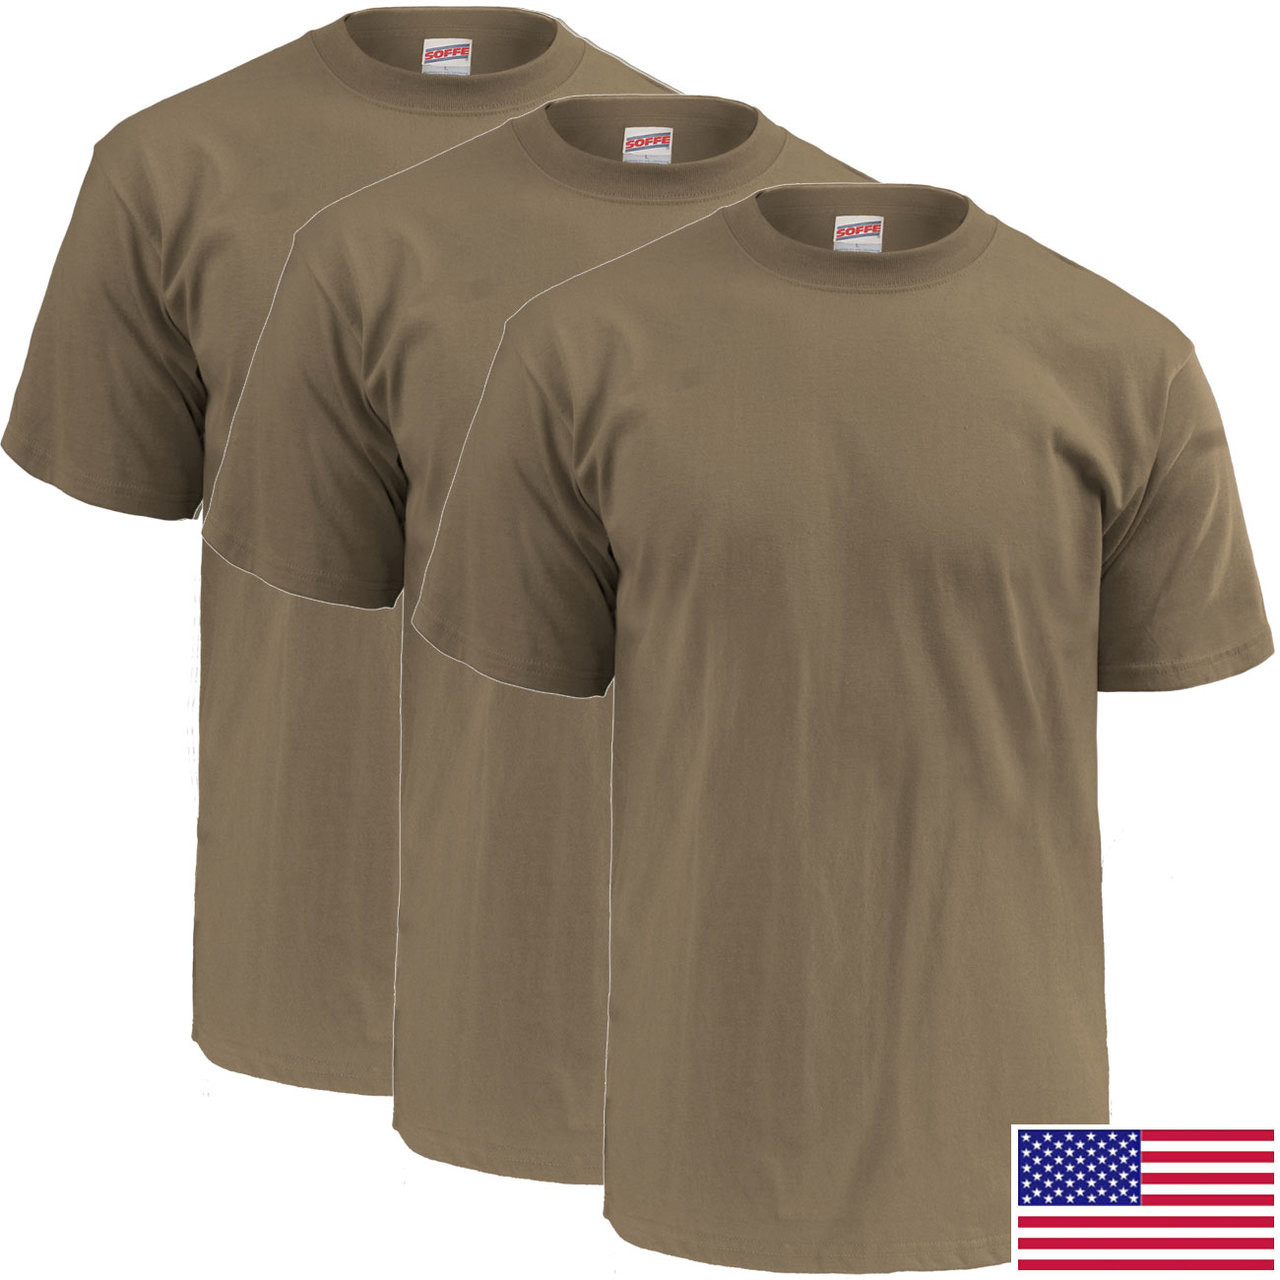 Military Tan OCP T-Shirt, 100 Percent Cotton Poly 3-Pack - Combatives Gear a DIV of NightGear